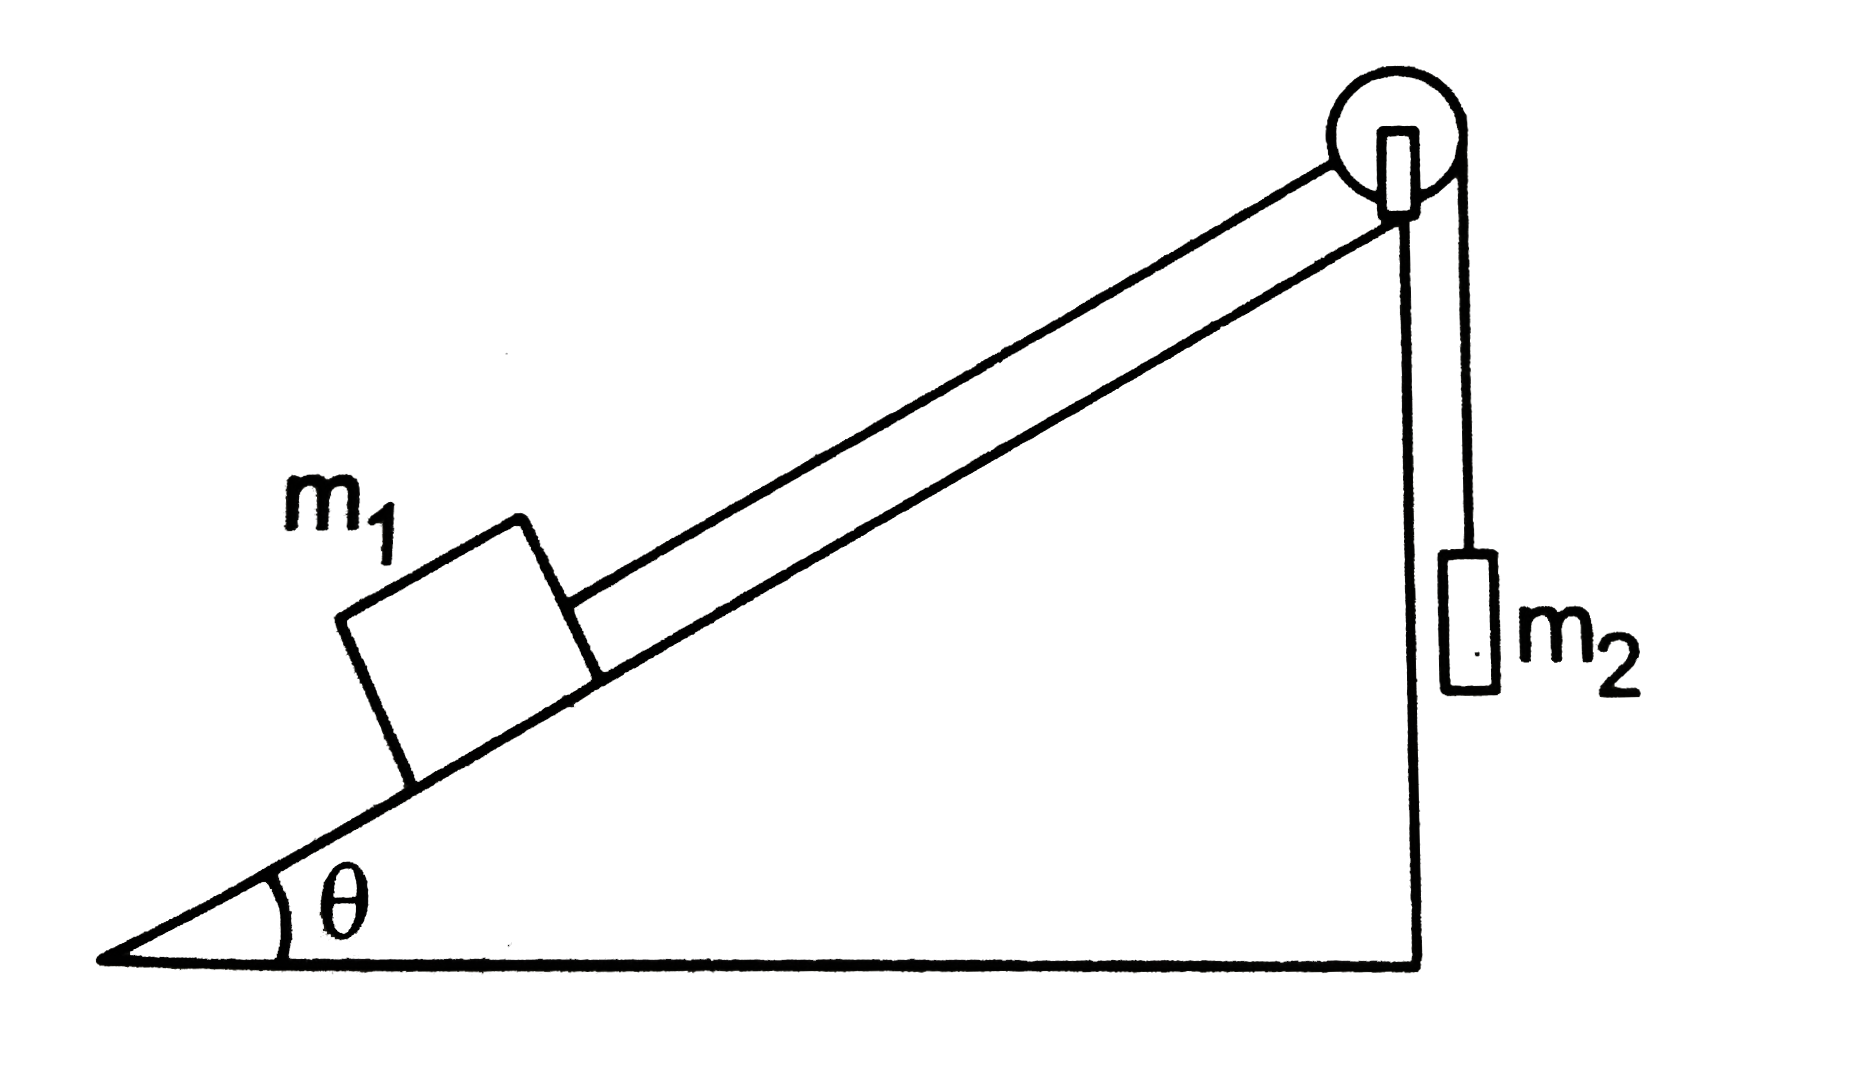 Two bodies of masses m1 and m2 are connected by a light  string going over a smooth lilght pulley at the end of an incline. The m1 lies on the incline m2 hangs vertically. The system is t rest. Find the angle of the incline and the fore exerted by the incline on the body of mass m1.